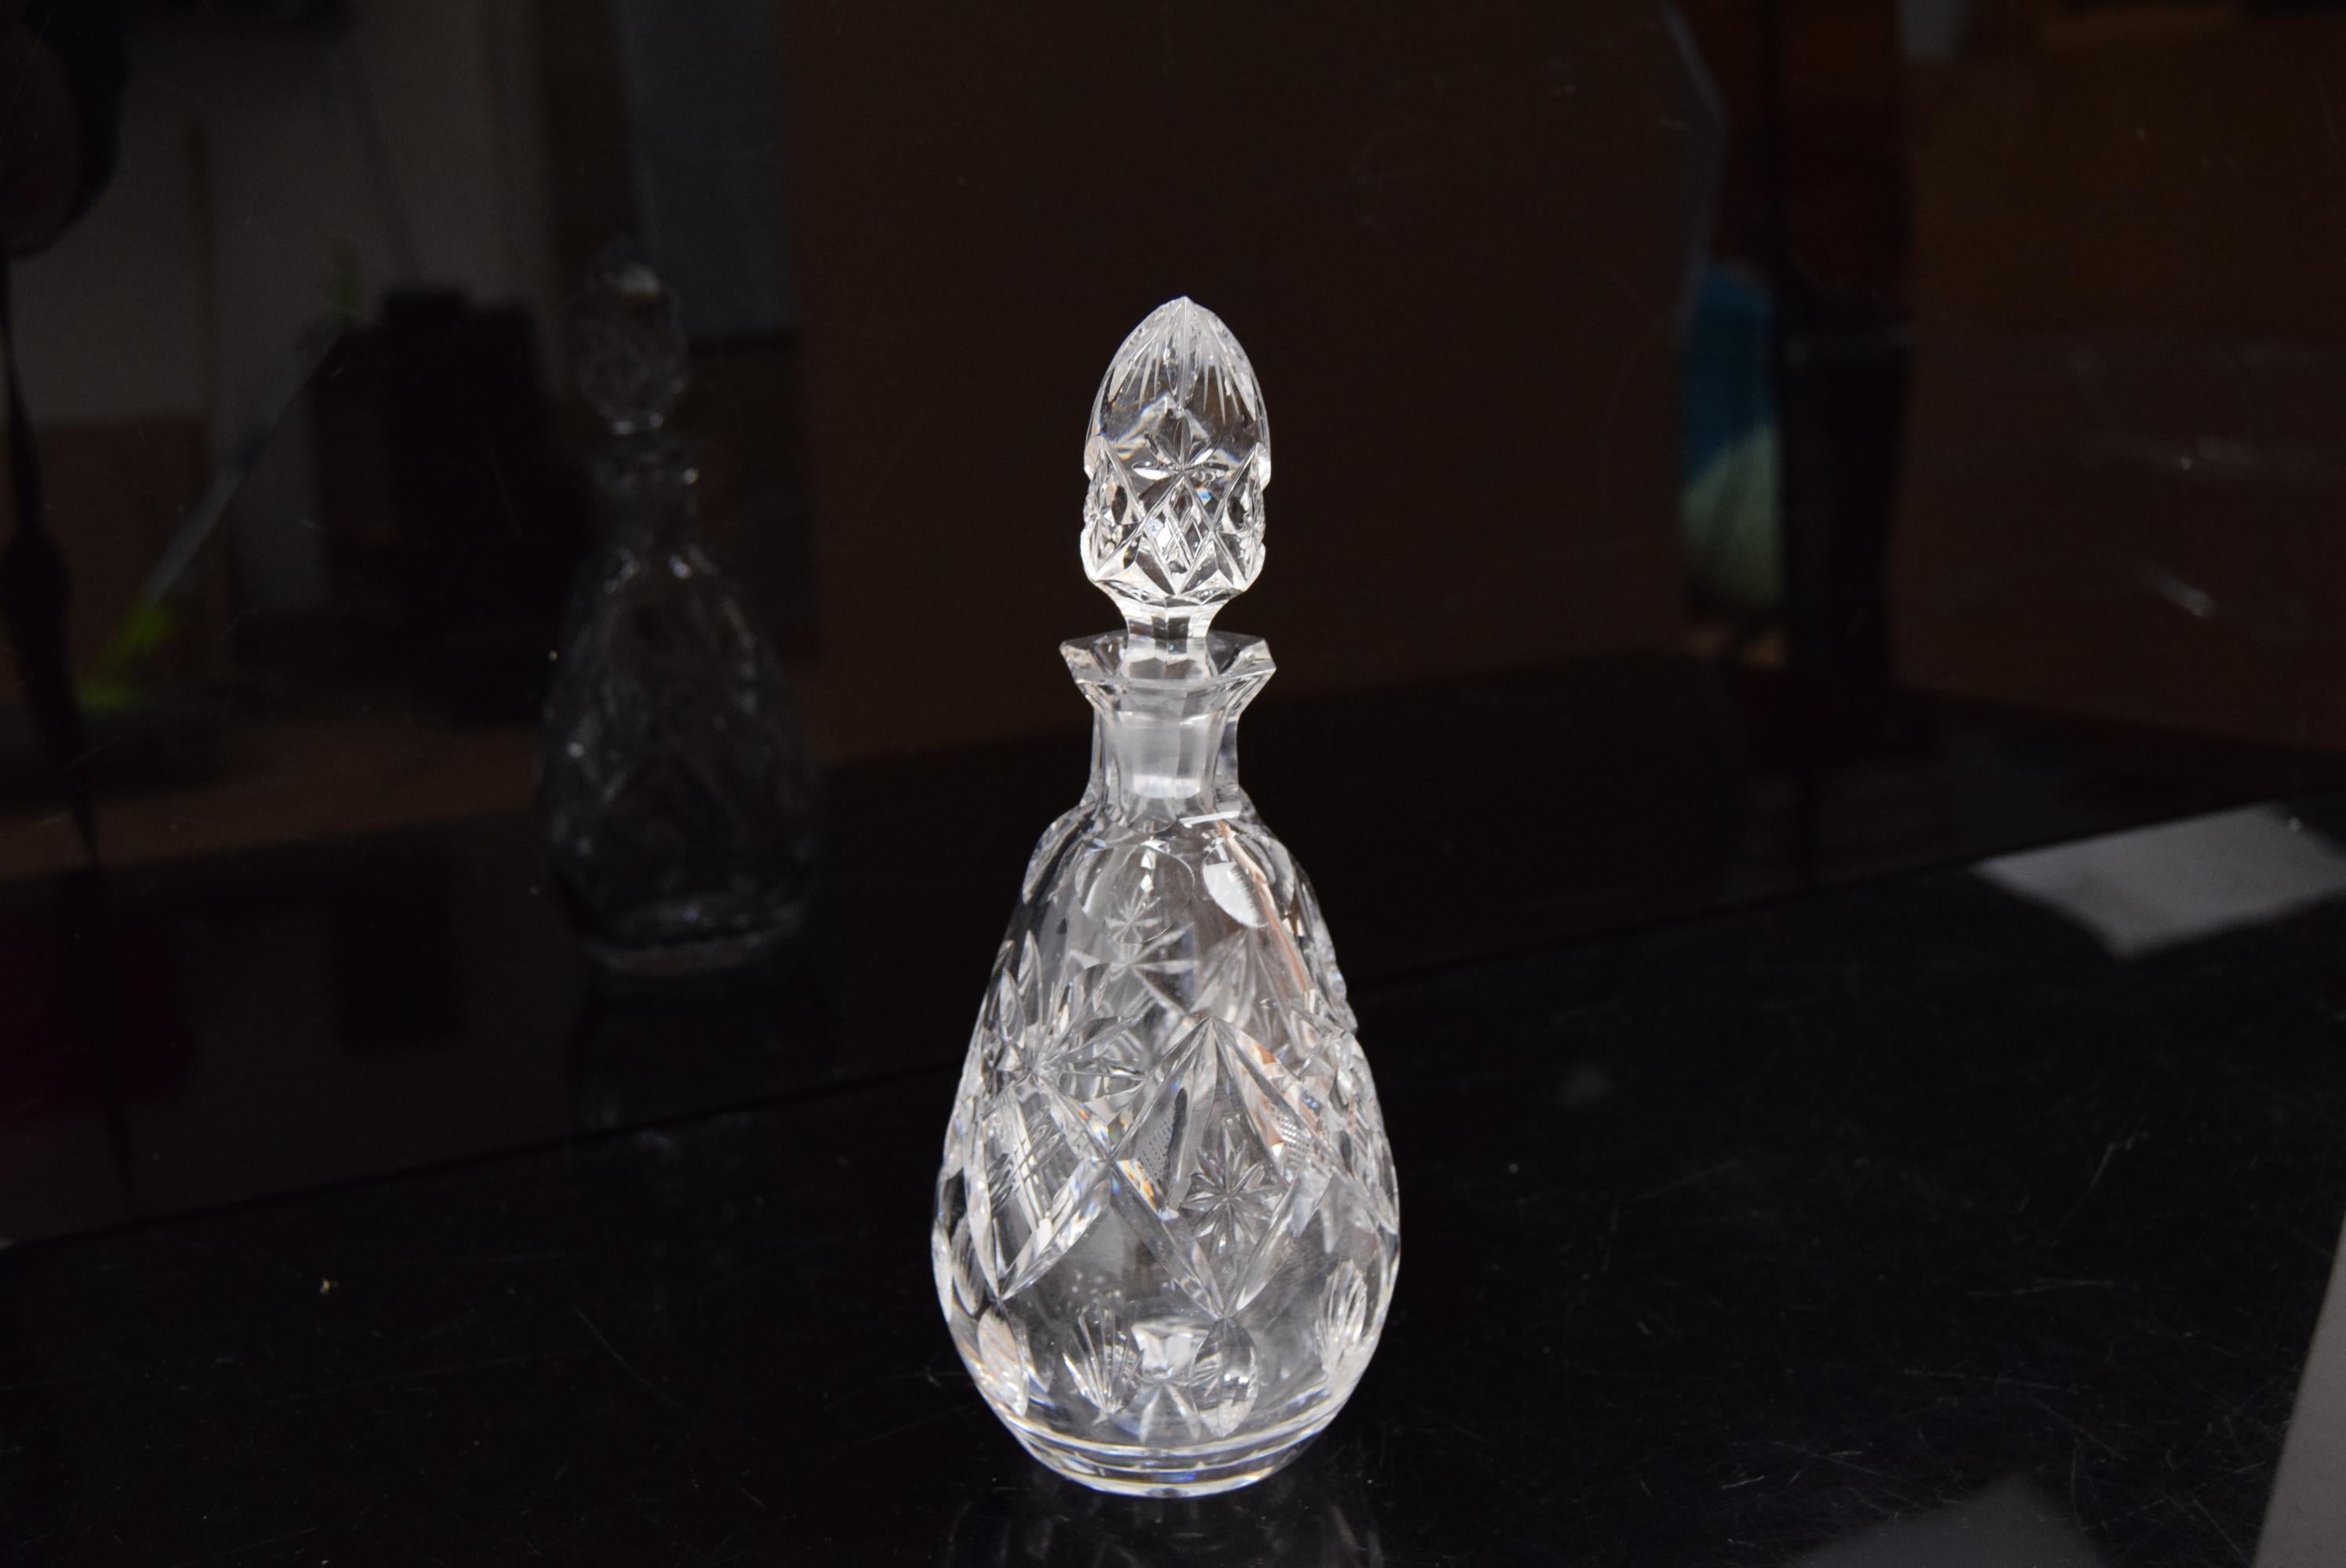 Made in Czechoslovakia
Made of cut crystal glass
Re-polished
Good original condition.